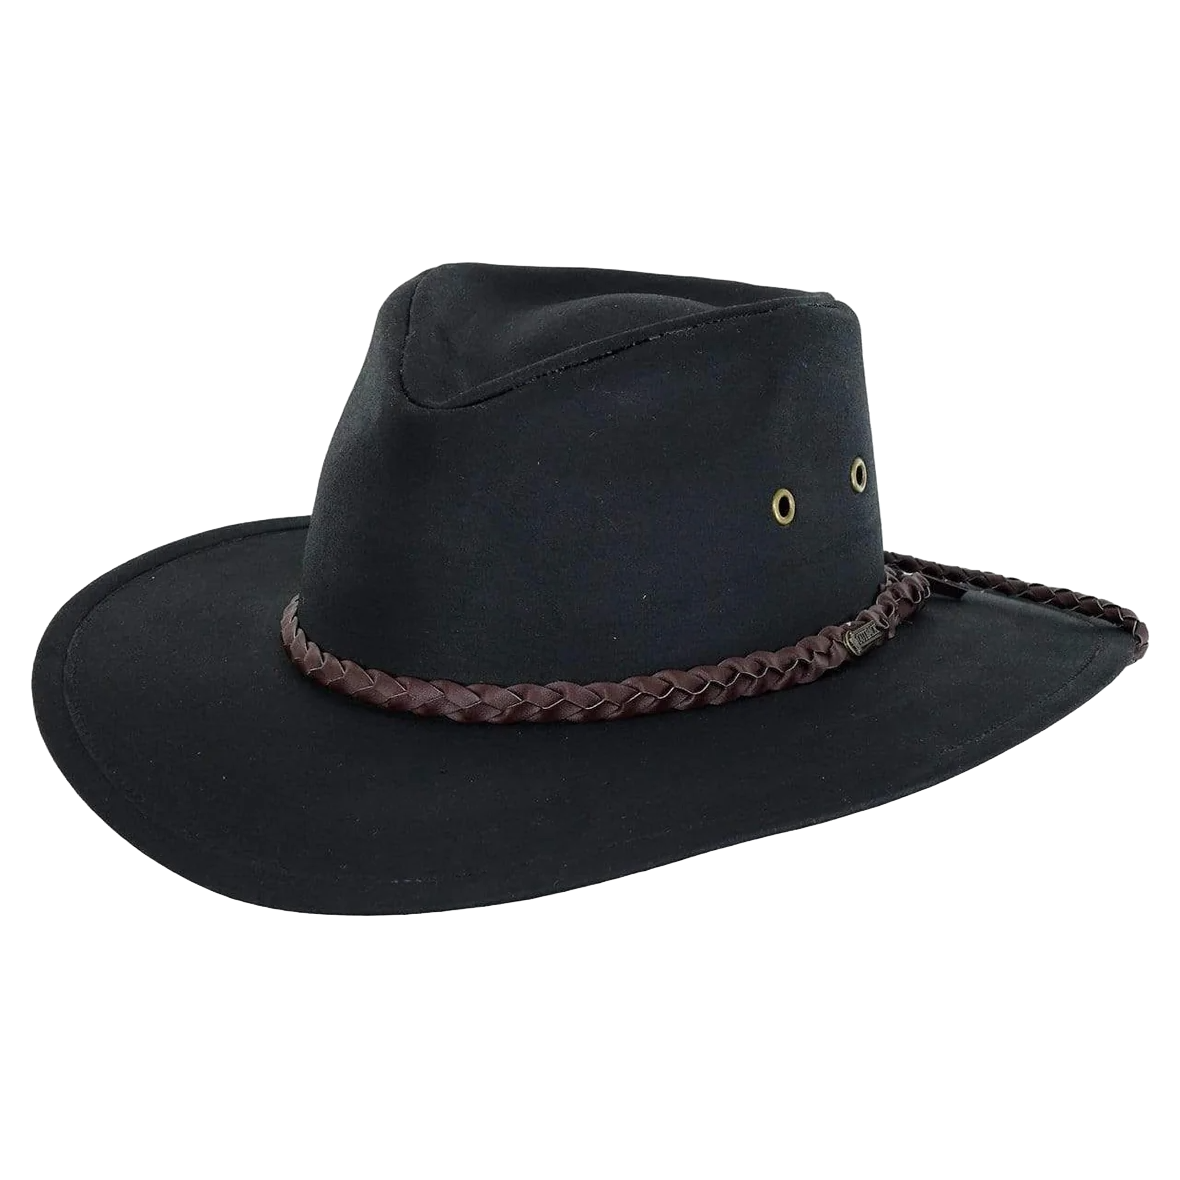 Outback Trading Grizzly Black Oilskin Hat 1486-BLK